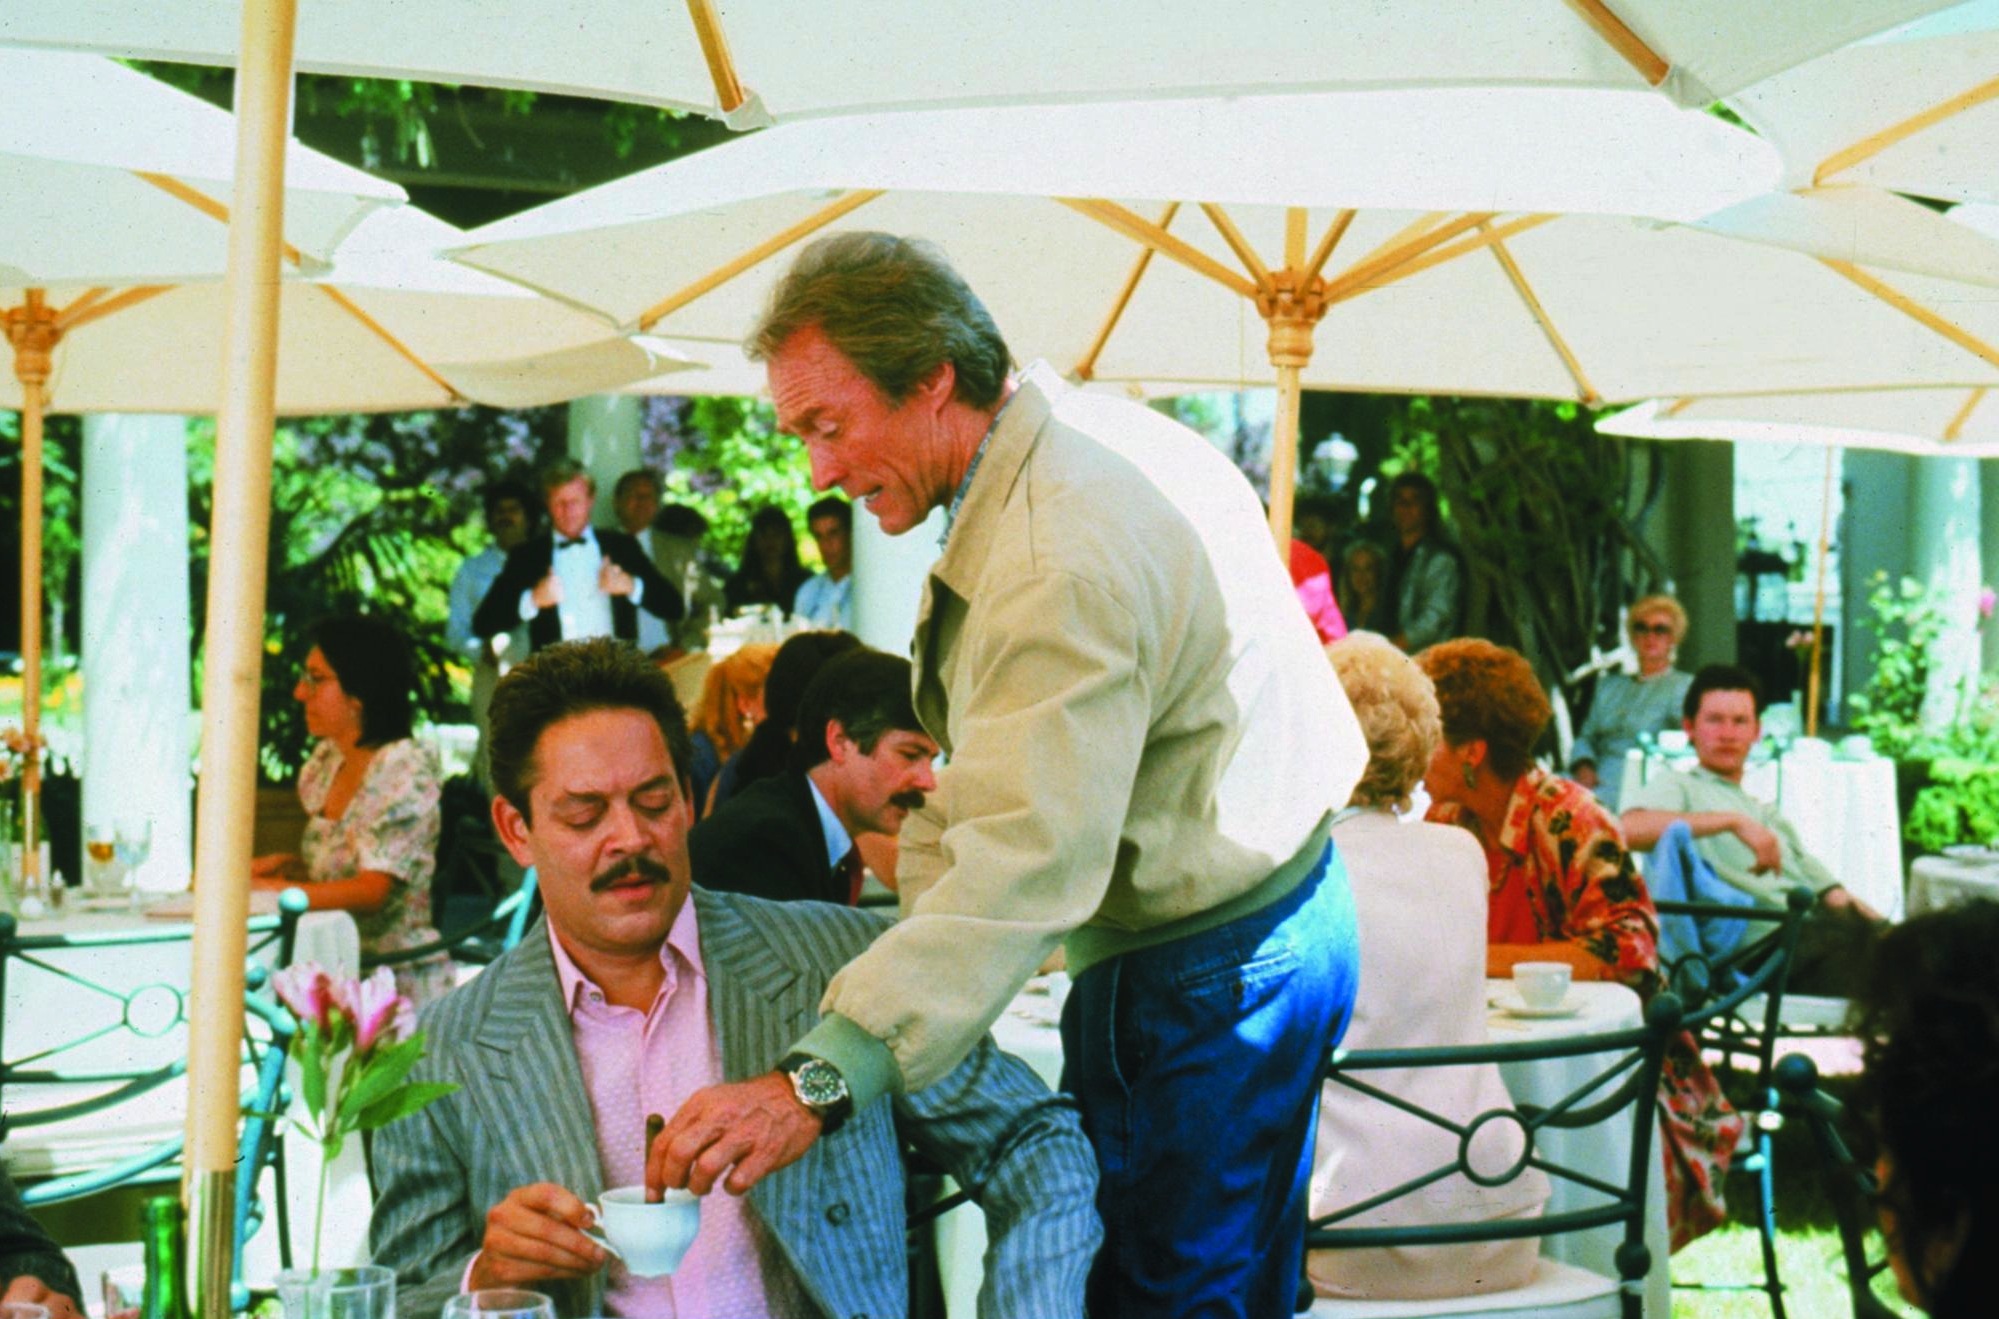 Still of Clint Eastwood and Raul Julia in The Rookie (1990)